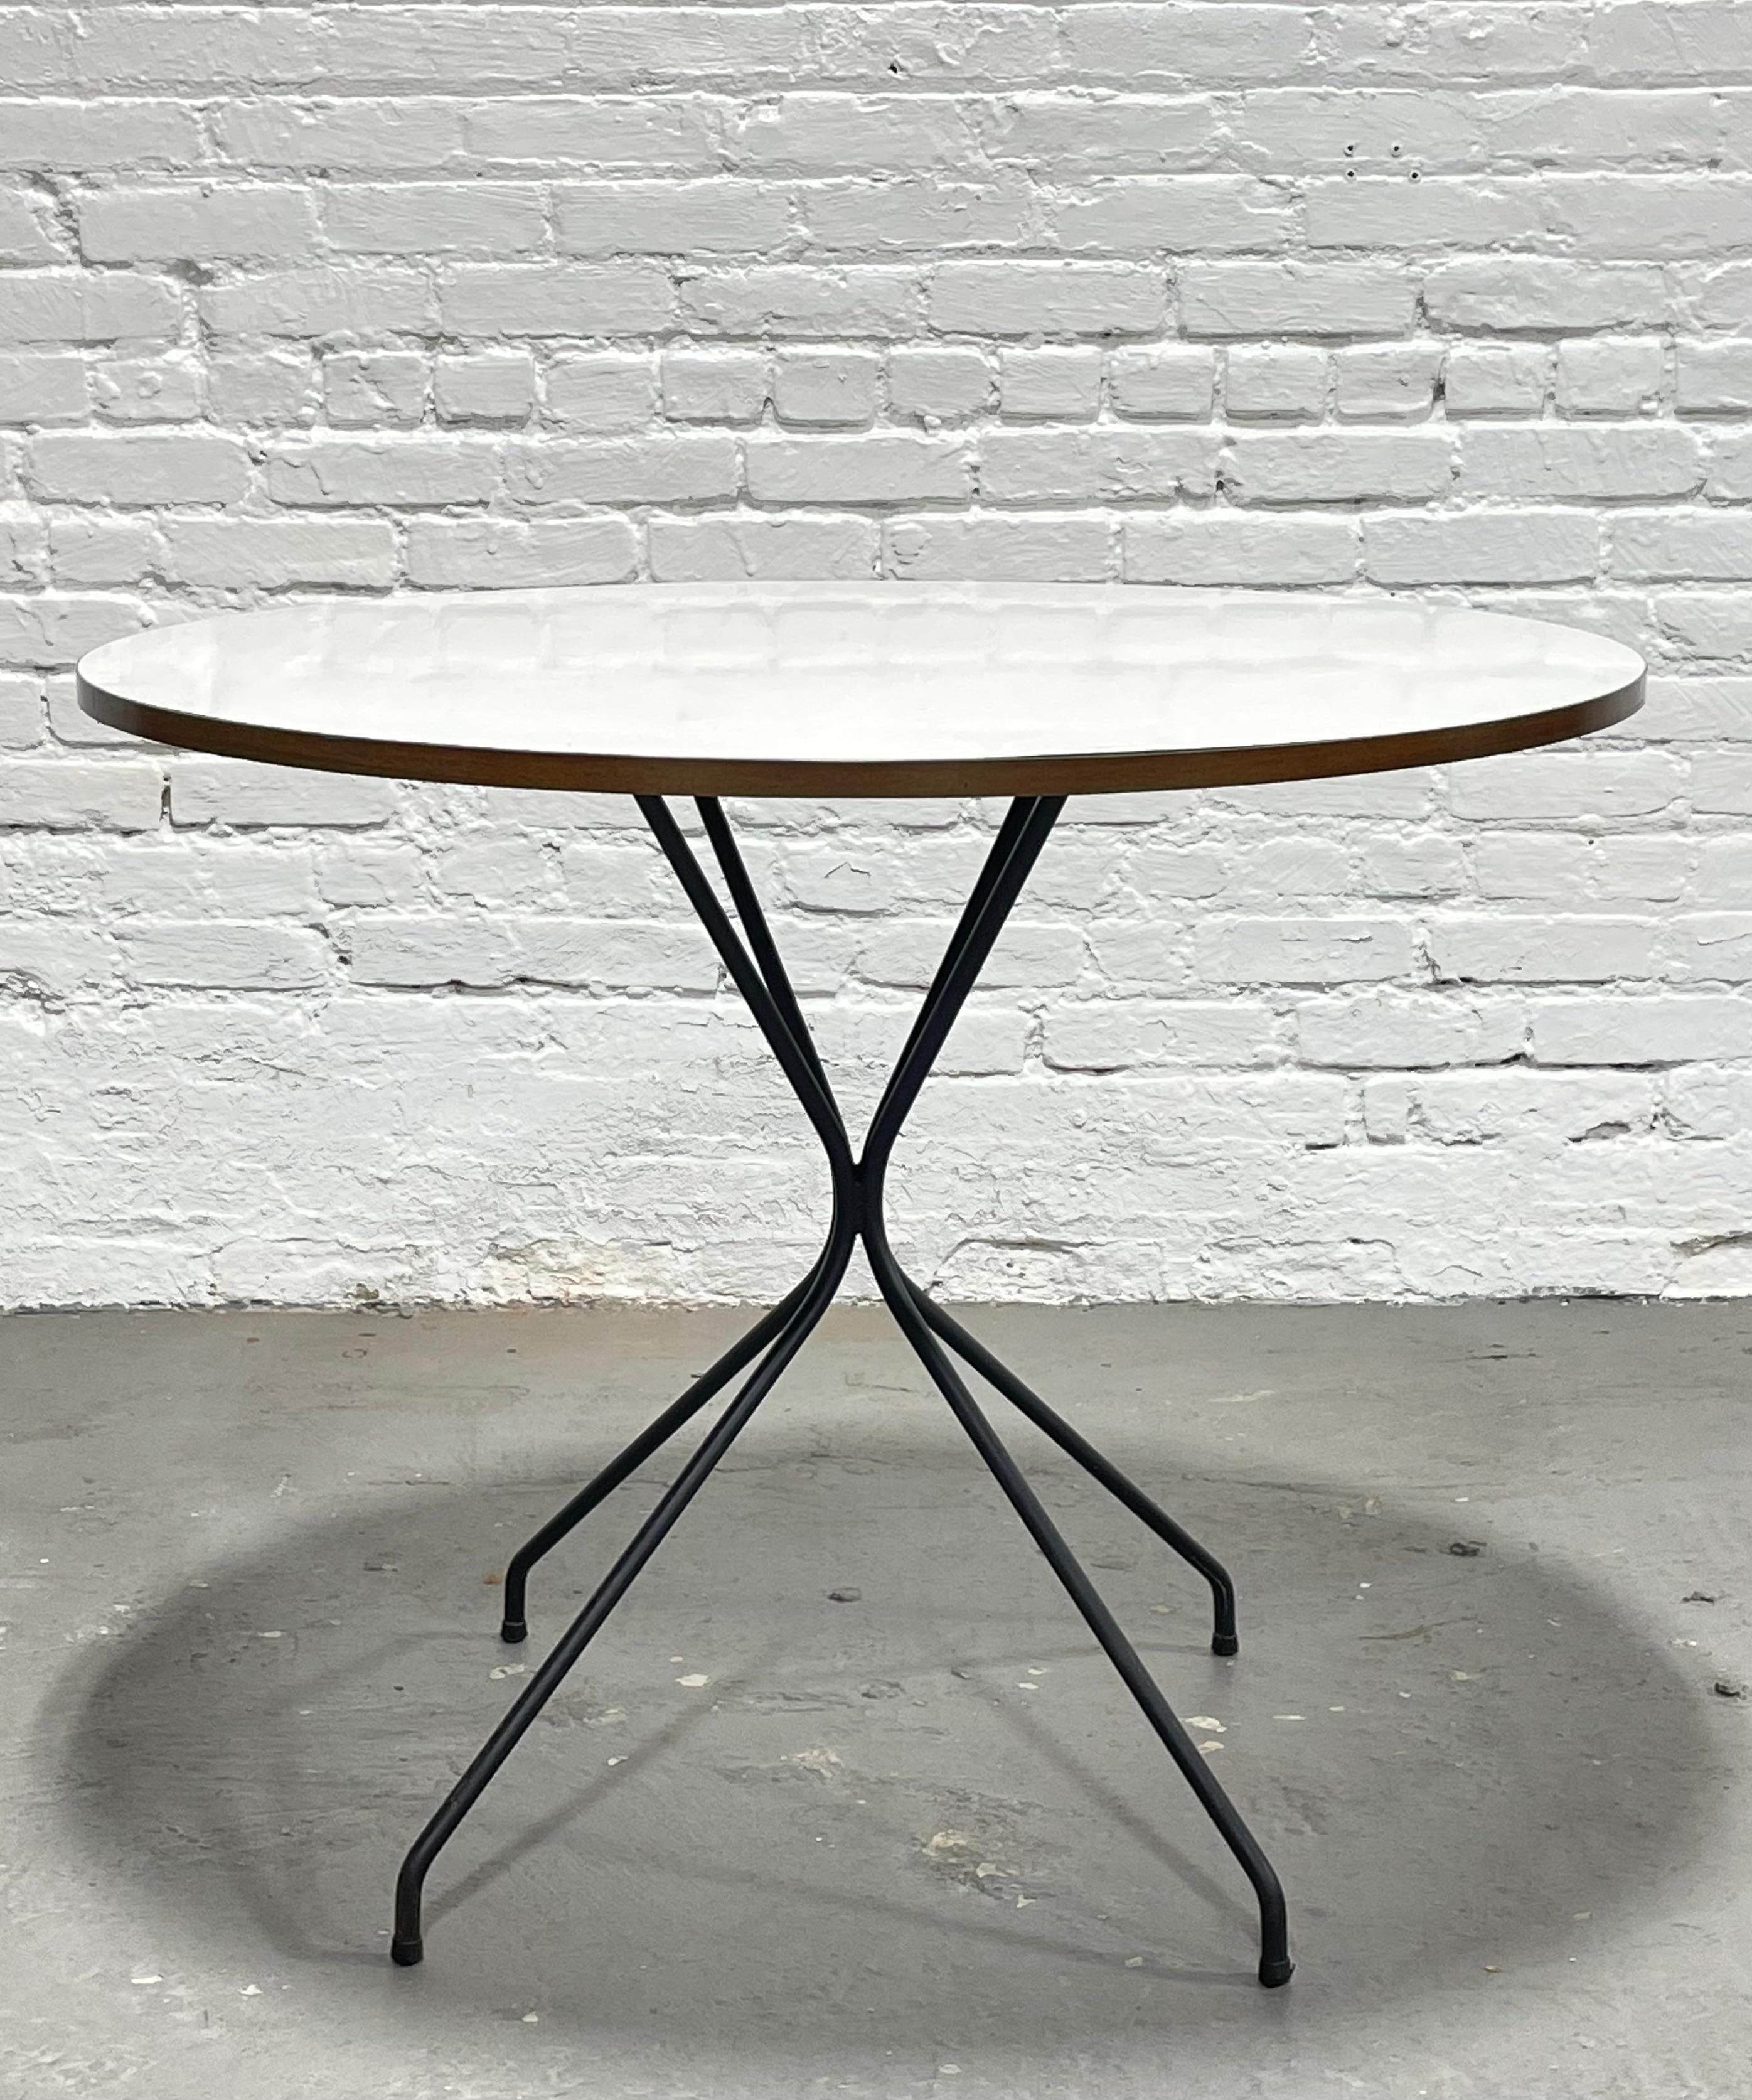 Mid Century Modern Dining Table in the style of Clifford Pascoe, c. 1960's. Perfectly sized for smaller spaces featuring a solid + sturdy black iron base, synched in the center for an hourglass look. Incredible and rare table, perfect for smaller